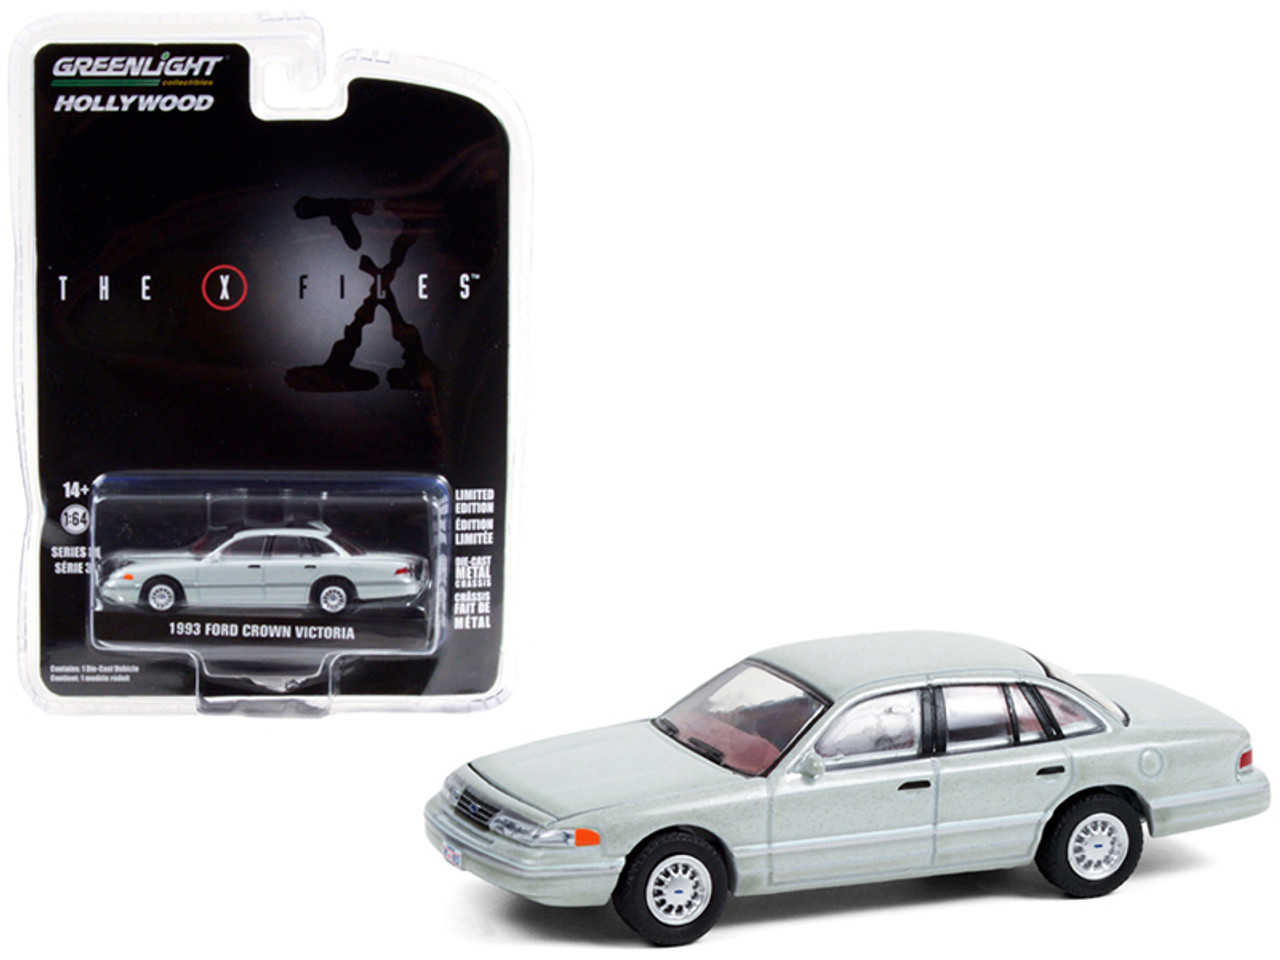 1993 Ford Crown Victoria Light Green Washington D.C. Unmarked Agent Car "The X-Files" (1993-2002) TV Series "Hollywood Series" Release 31 1/64 Diecast Model Car by Greenlight